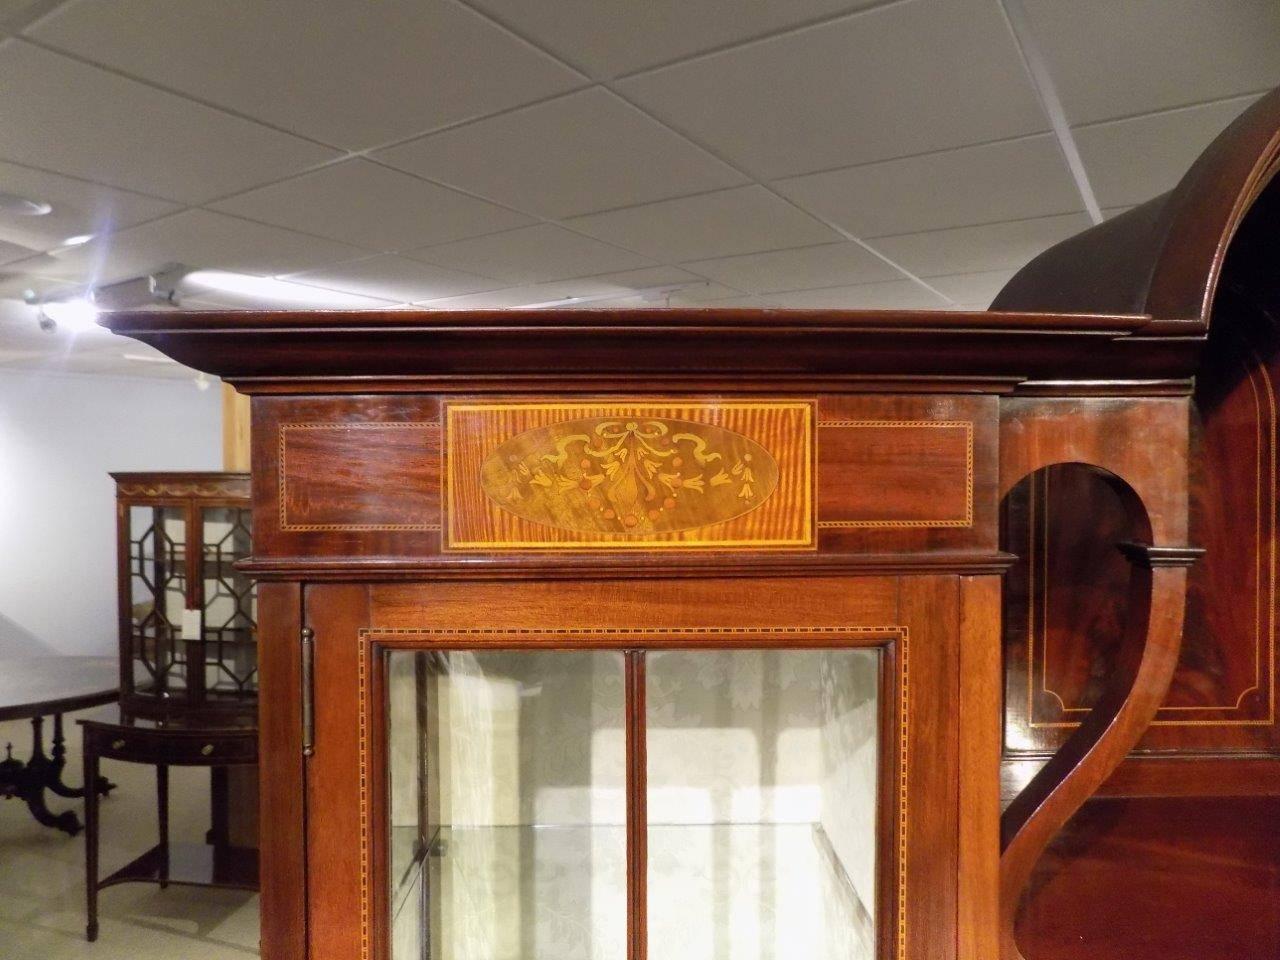 A fine quality mahogany inlaid Edwardian period display cabinet by Shapland and Petter Of Barnstaple. Having a central domed cornice above a panelled and inlaid back, flanked by twin mahogany glazed doors with fine marquetry inlaid panels, opening